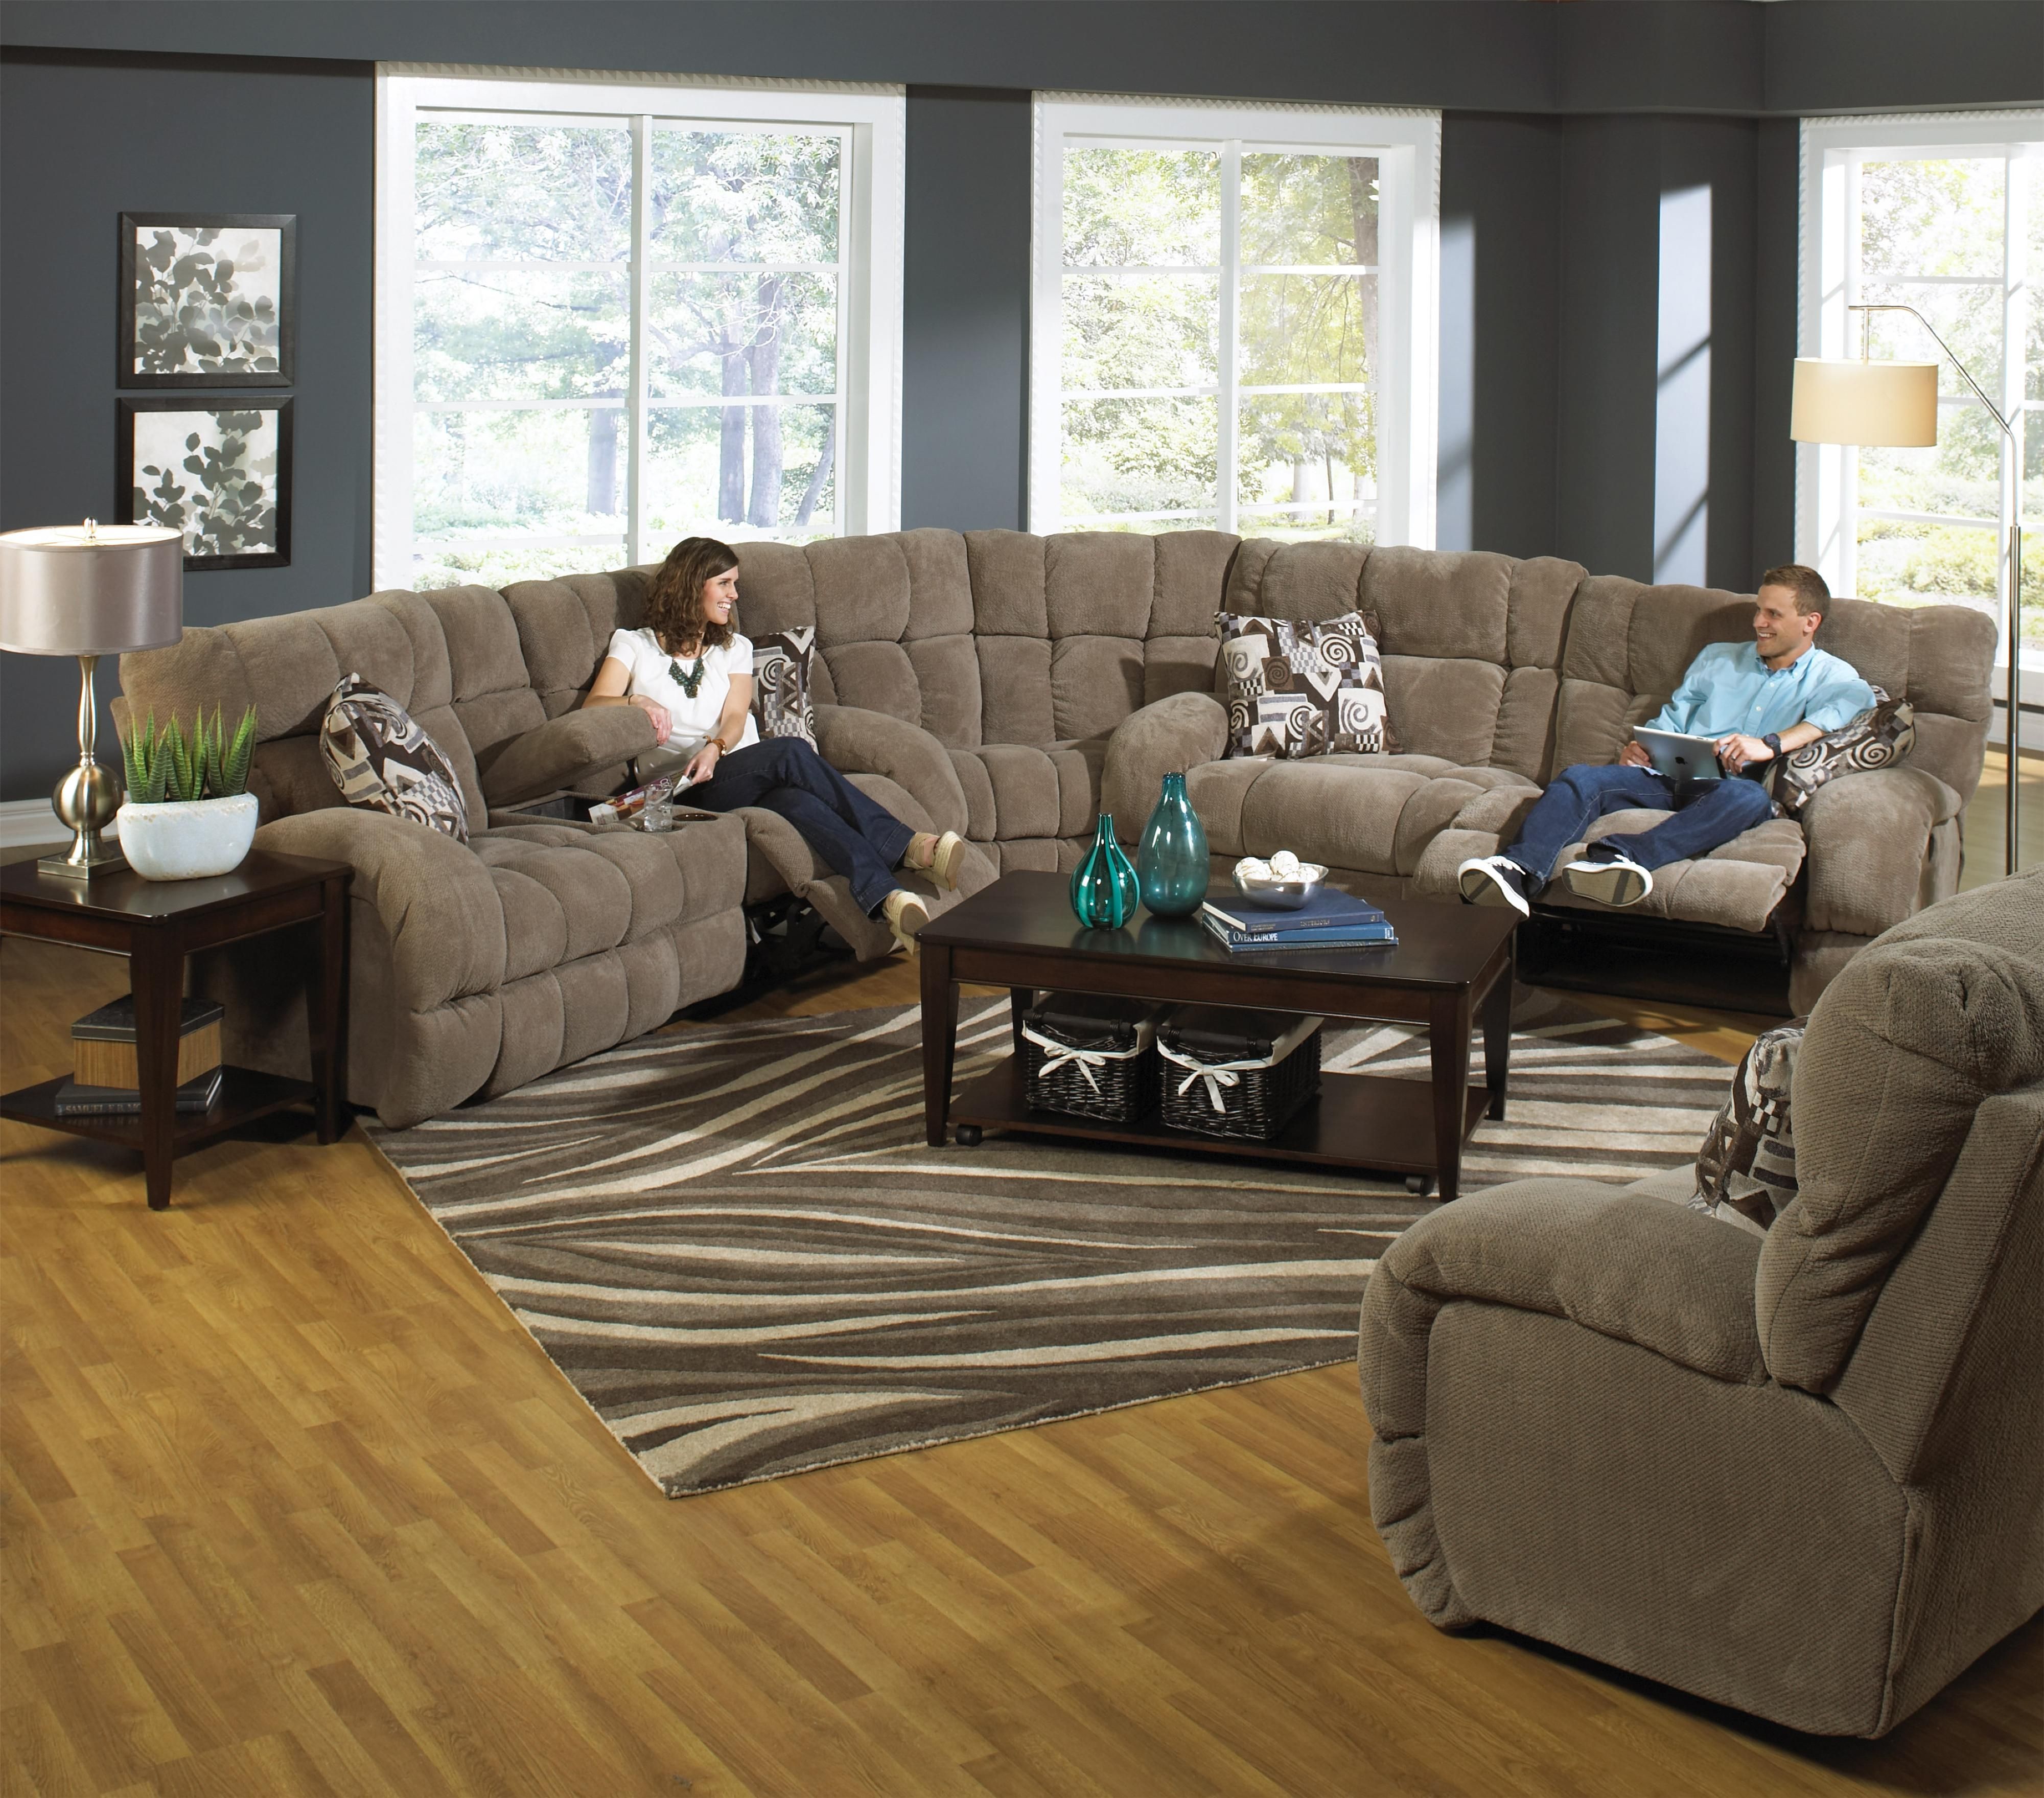 Power Lay Flat Recliner With Wide Seat Catnapper Wolf And Inside 7 Seat Sectional Sofa 